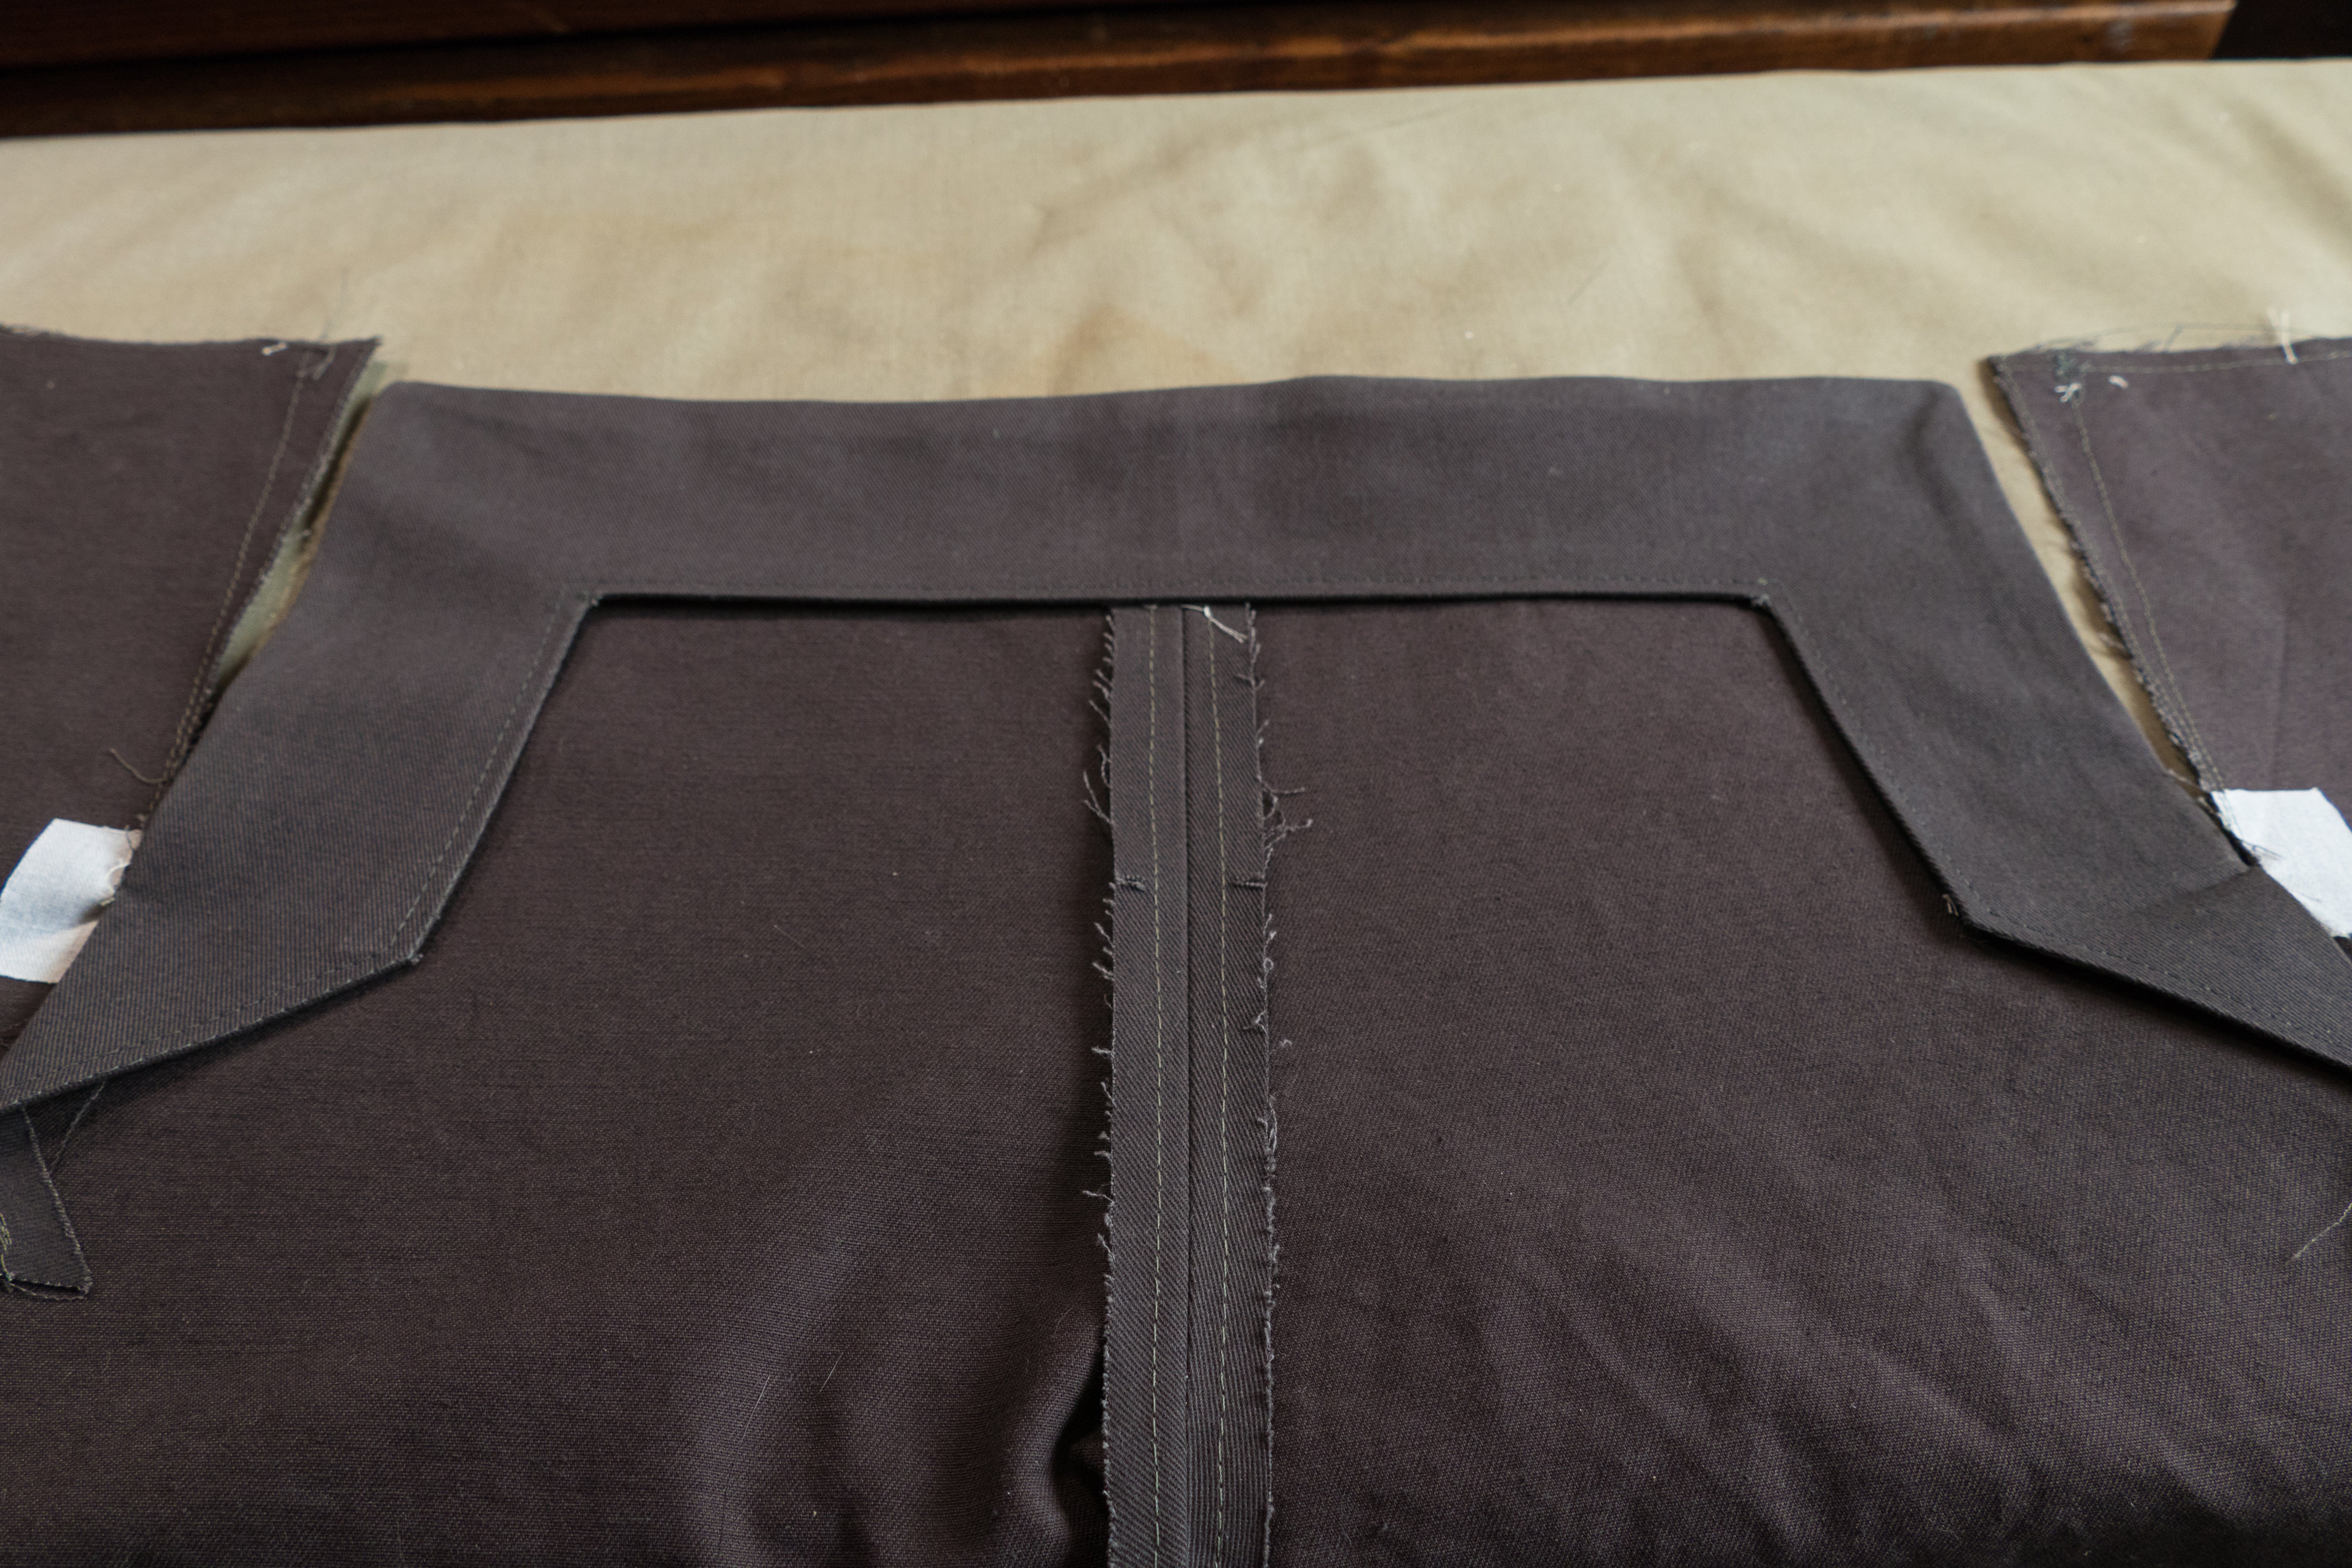 Front Buttonhole Facing turned to the inside of the pant.